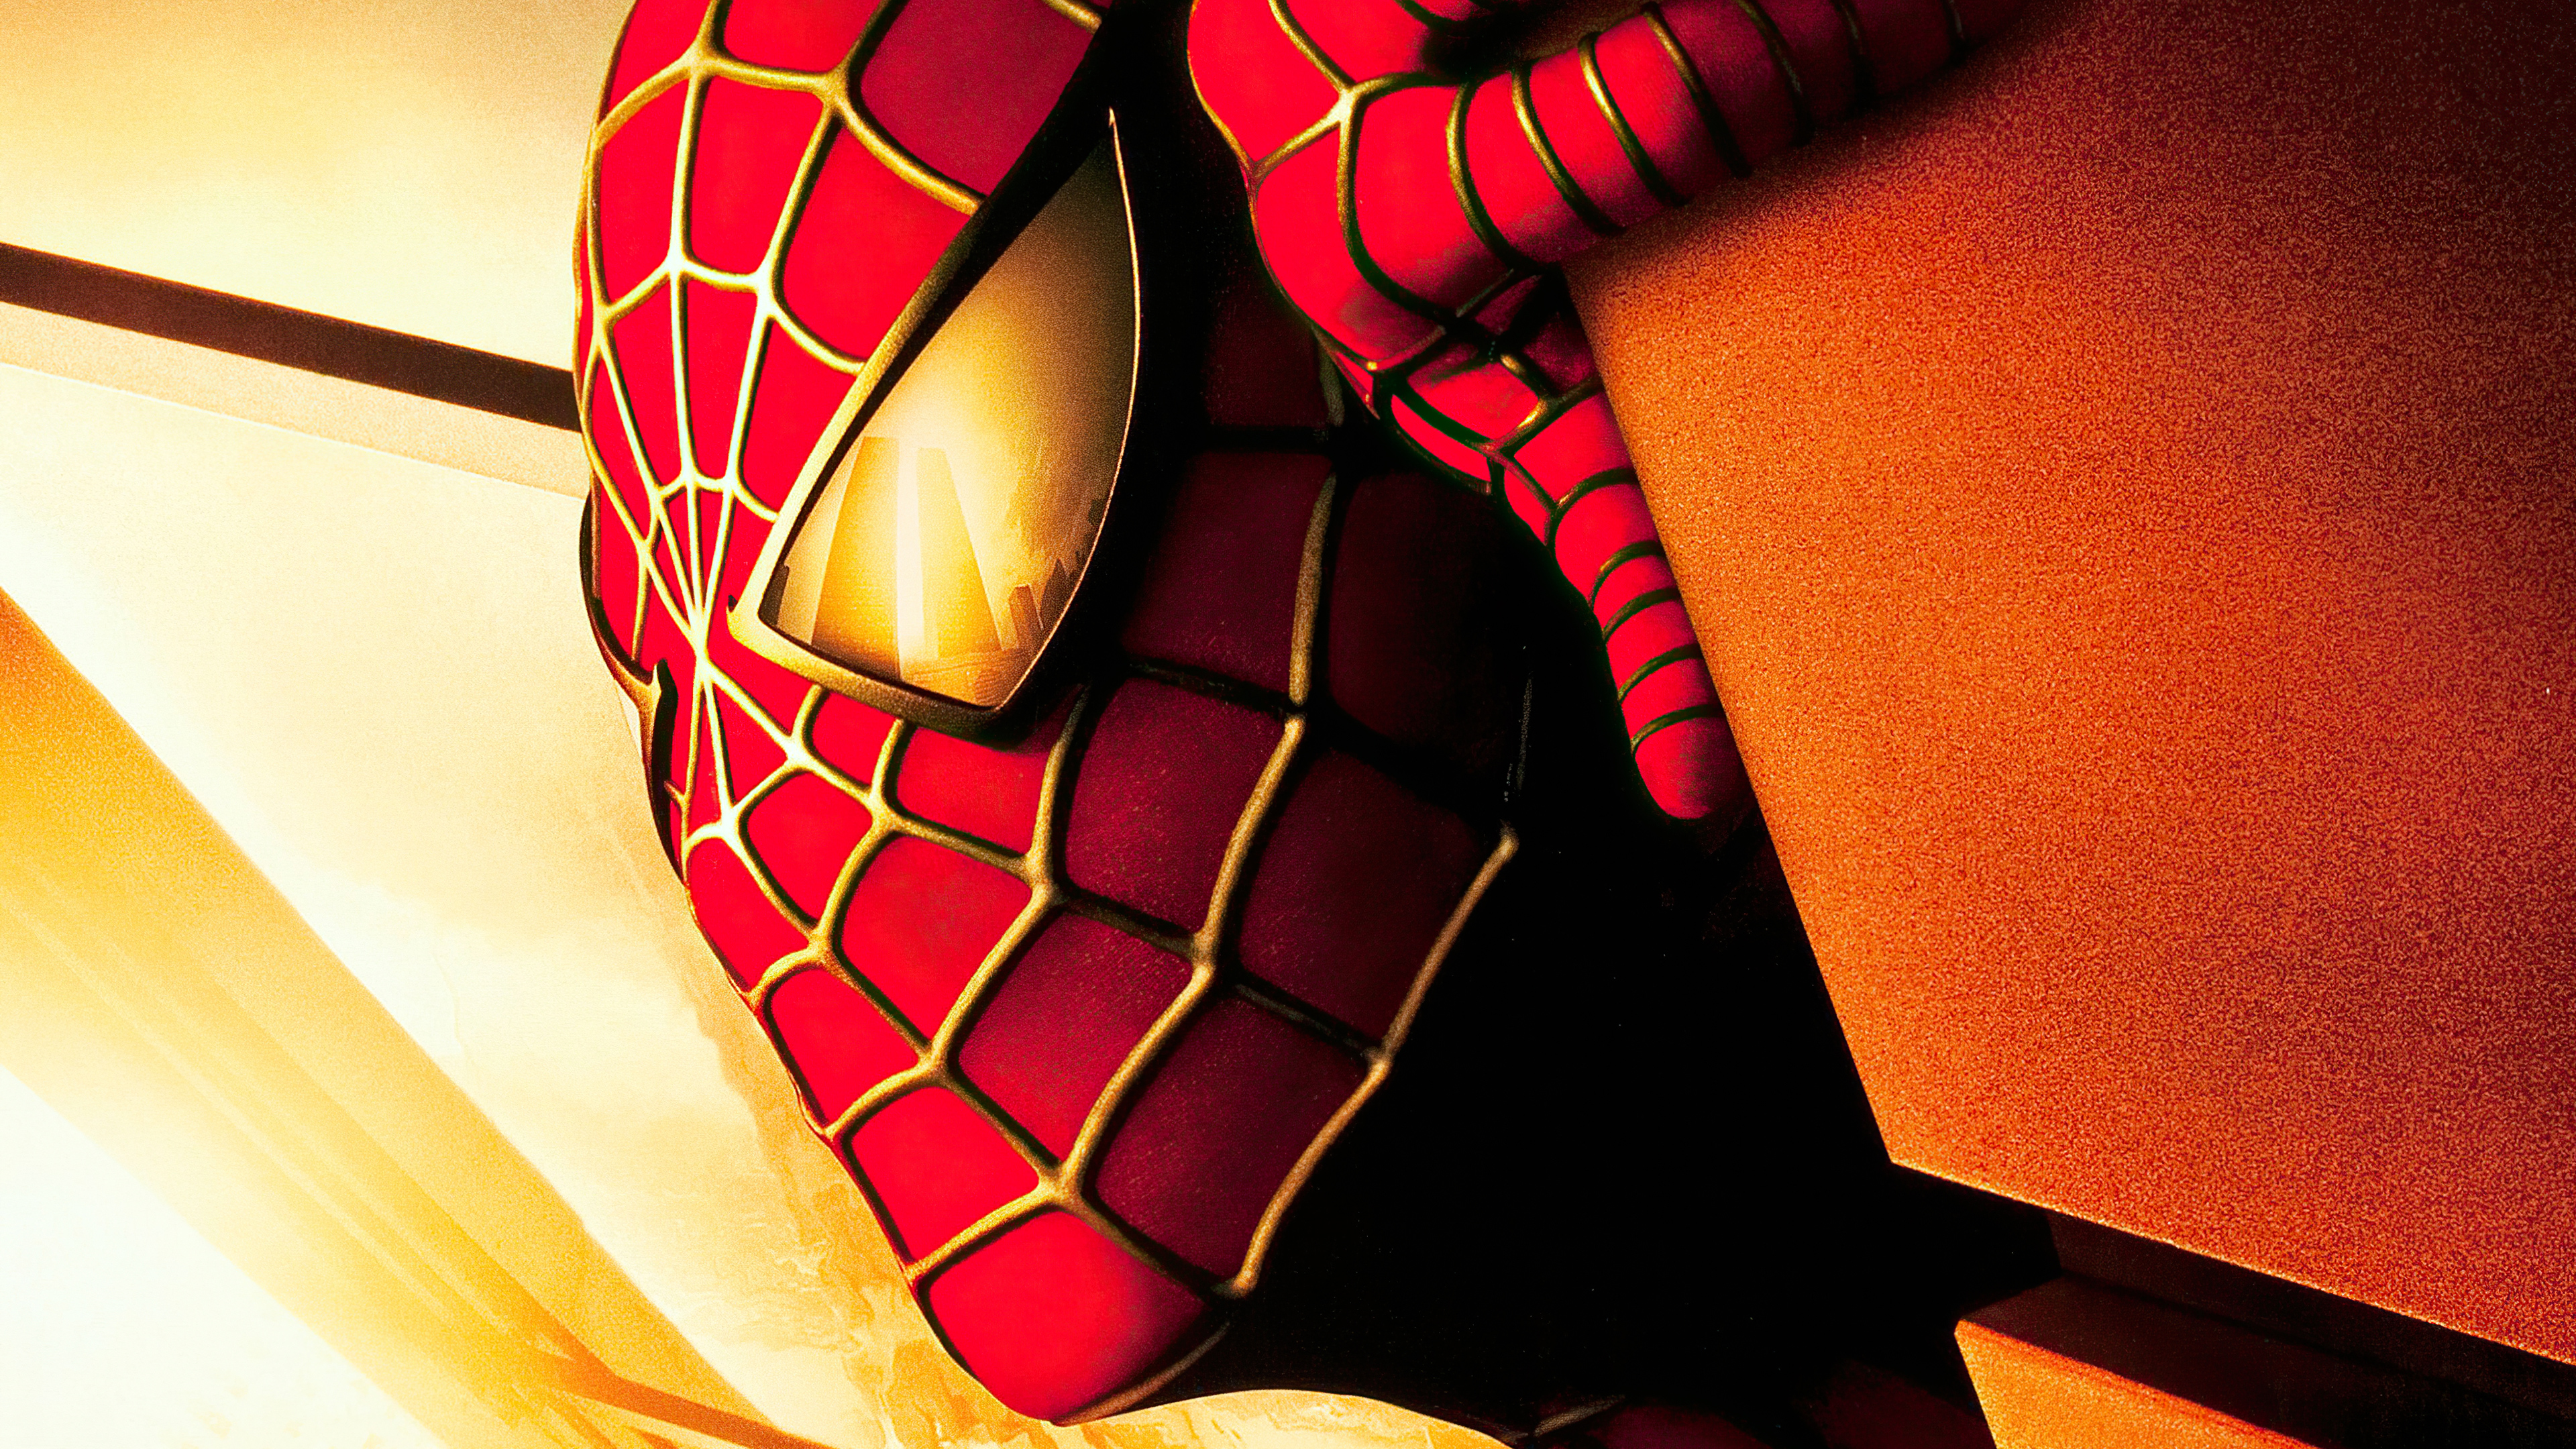 Tobey Maguire Peter Parker 4k Ultra HD Wallpaper